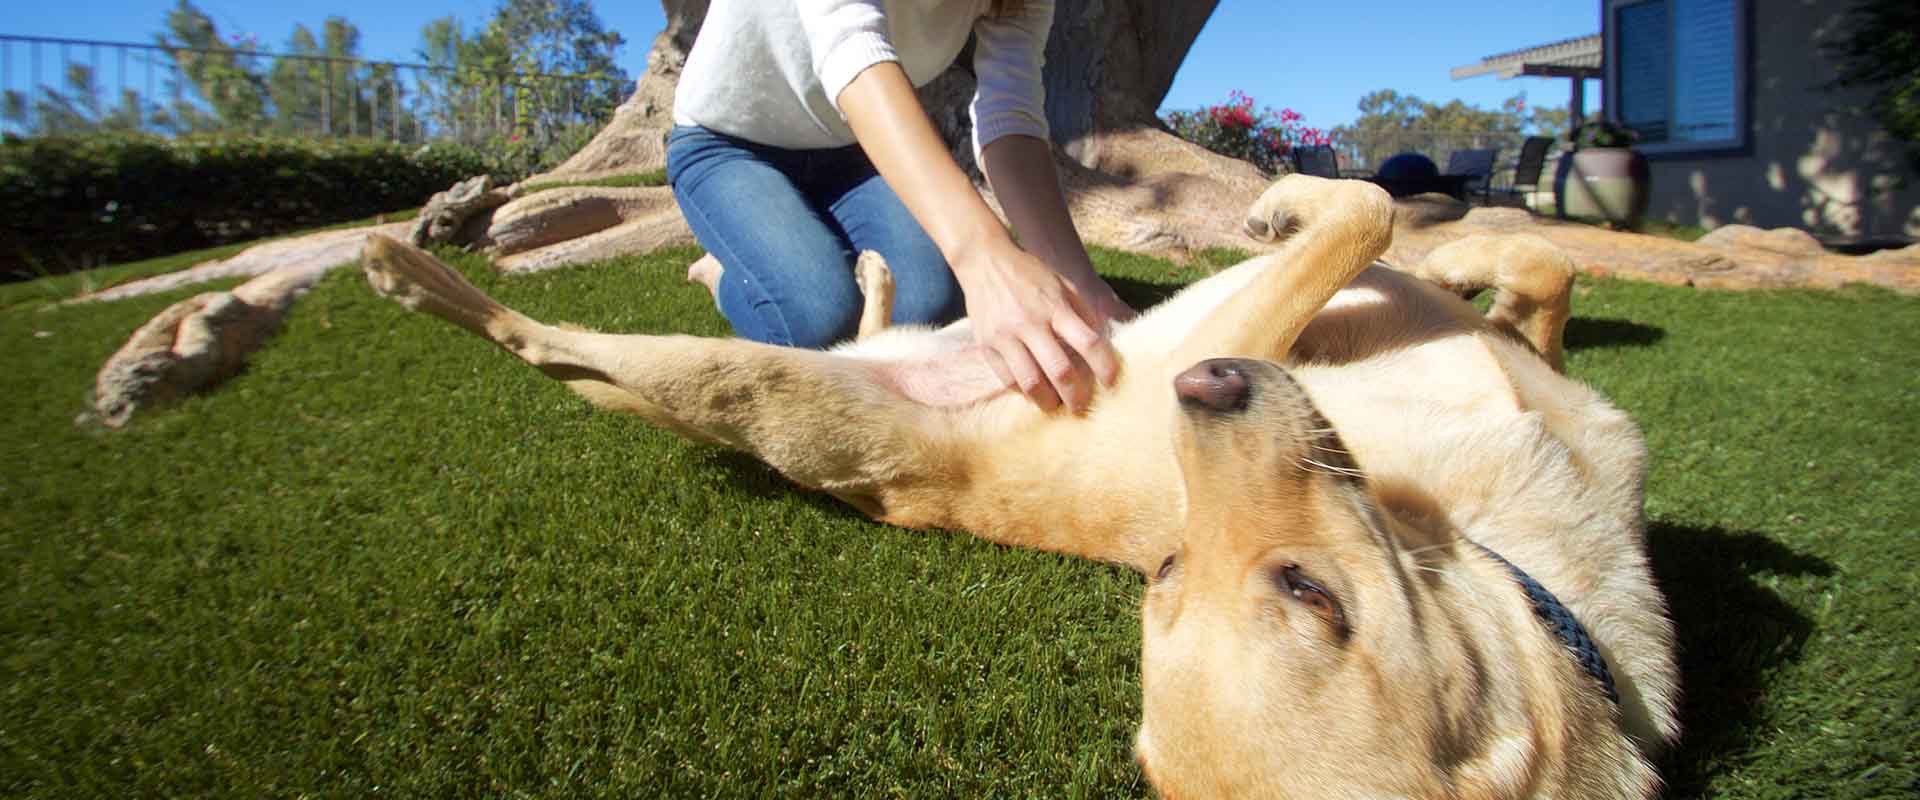 dog getting belly rubbed on artificial grass